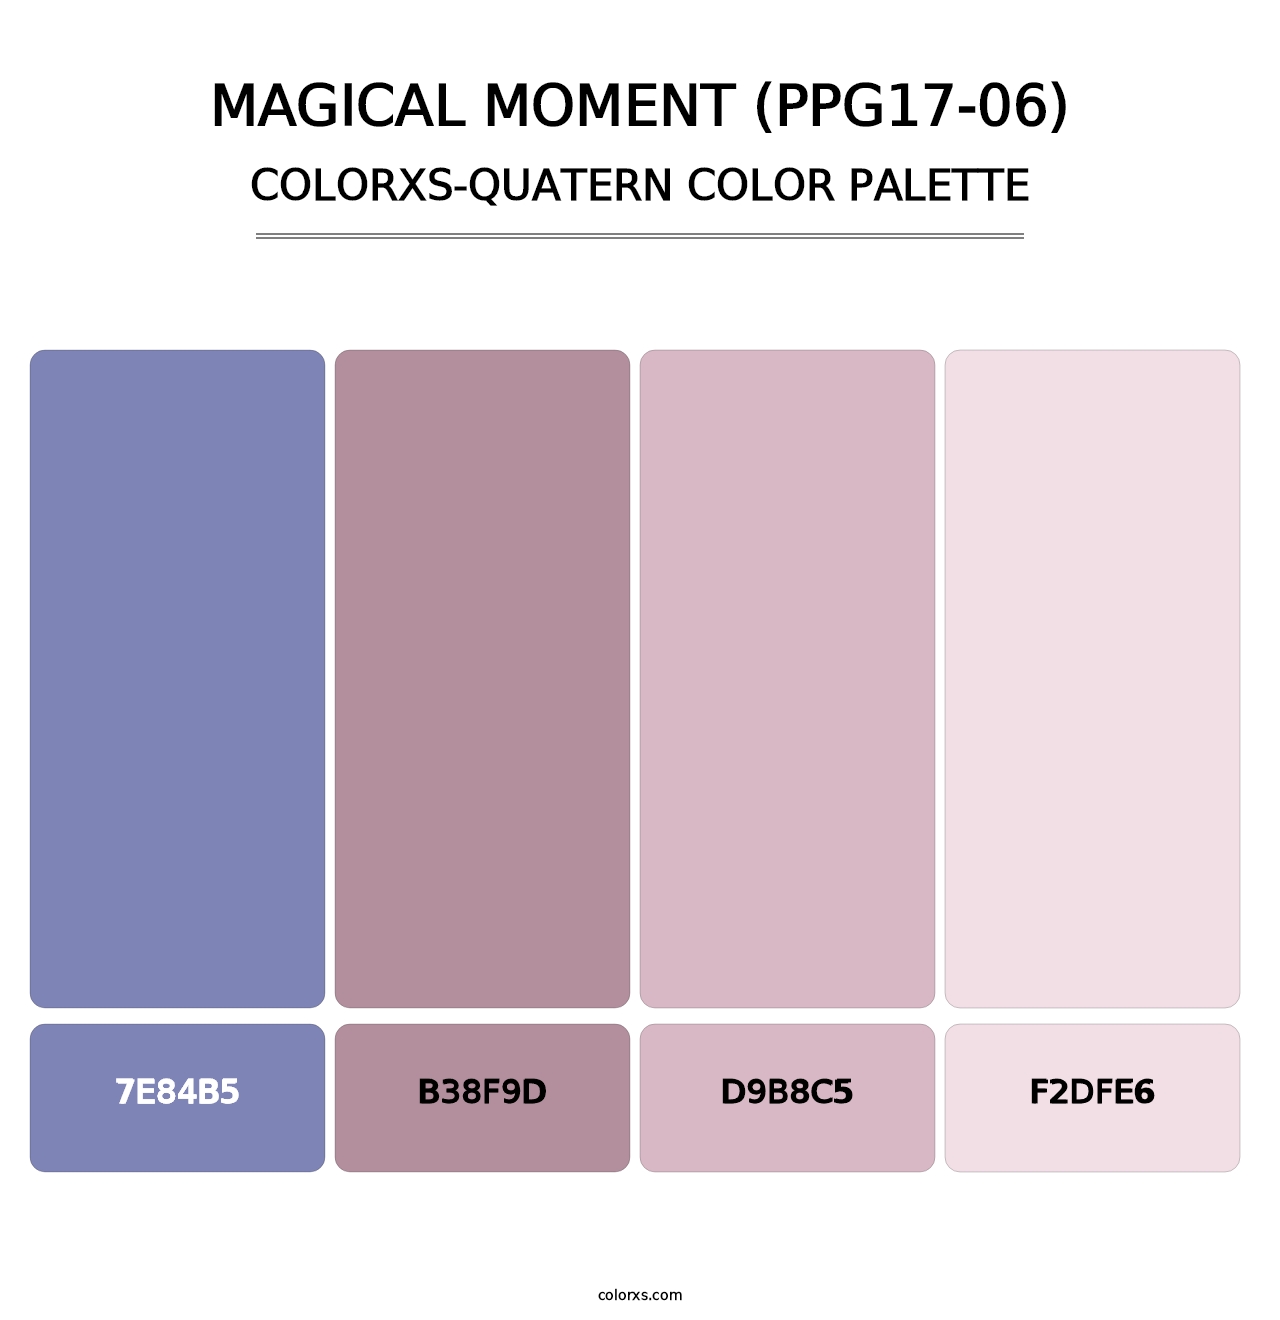 Magical Moment (PPG17-06) - Colorxs Quatern Palette